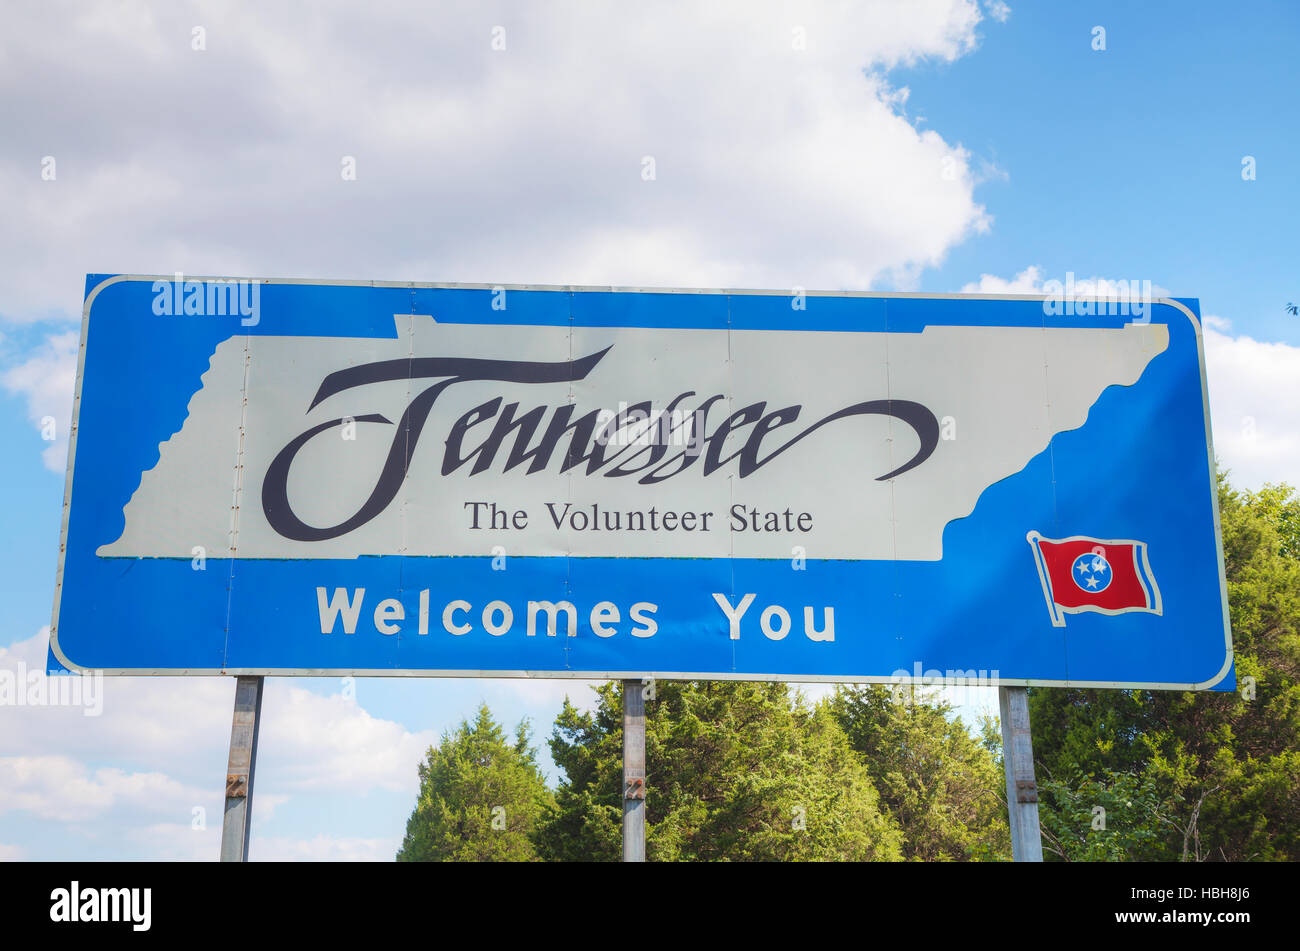 Tennessee welcomes you sign Stock Photo